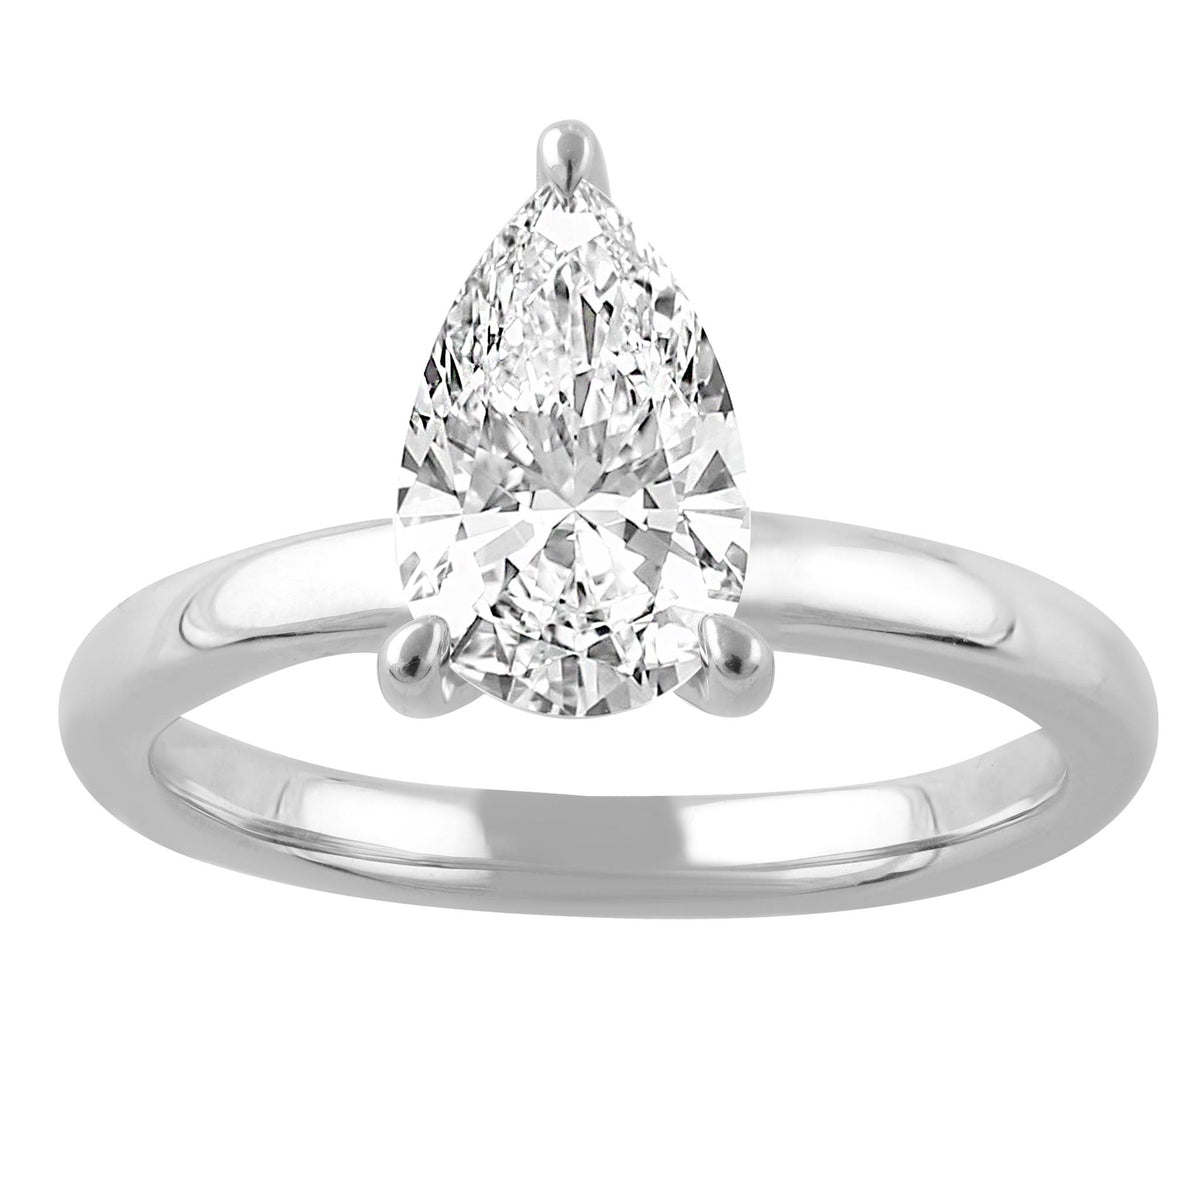 14Kt White Gold Solitaire Solitaire Ring With 2.03ct Lab-Grown Center Diamond